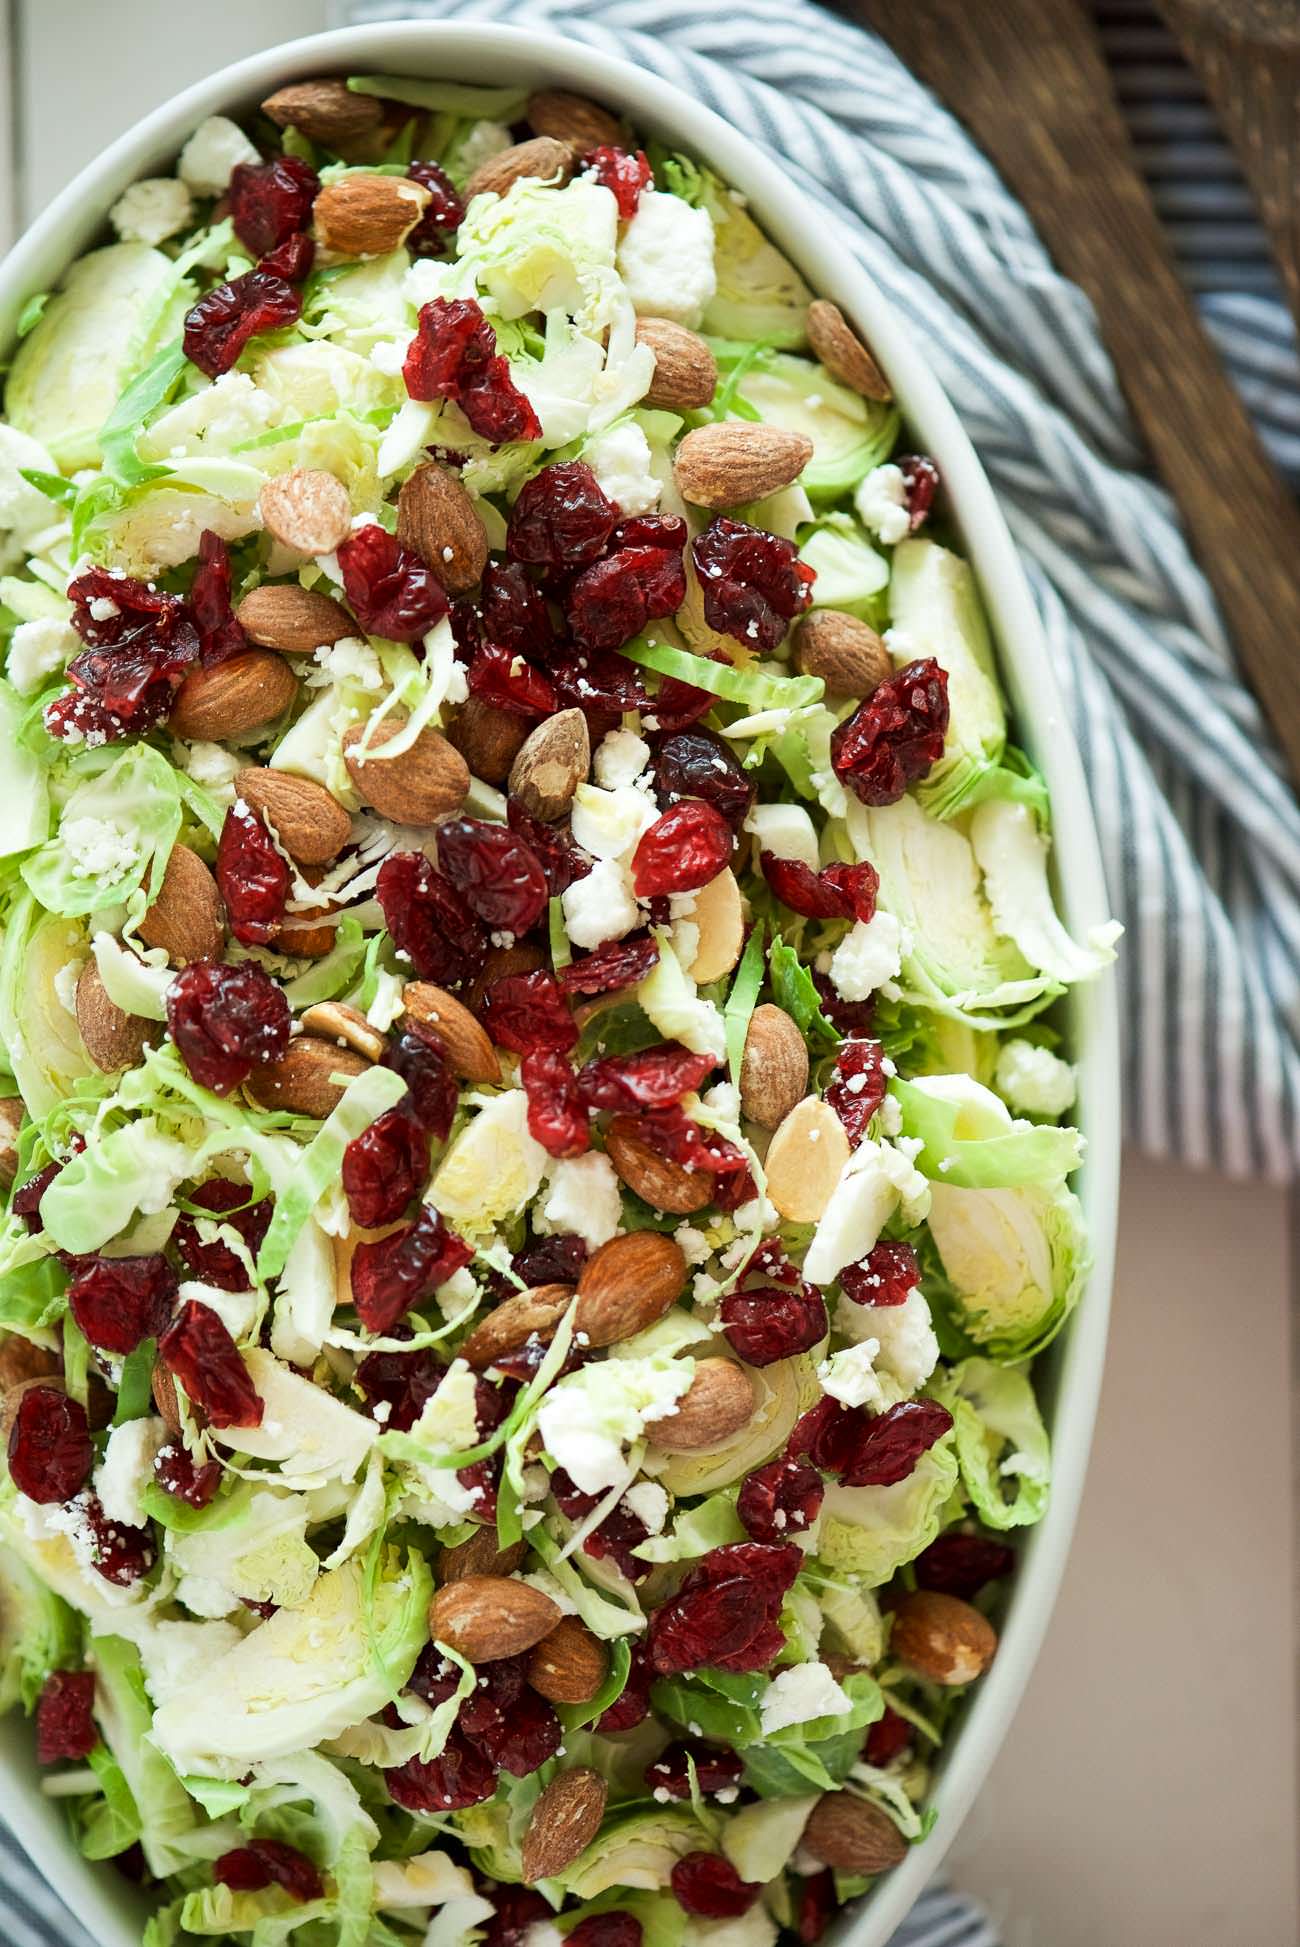 Spring Shaved Brussels Sprout Salad with Lemon Poppyseed Dressing is a fast and light salad that is full of tart cranberries, creamy goat cheese and salty almonds! And tossed in a flavorful, homemade citrus poppyseed dressing!